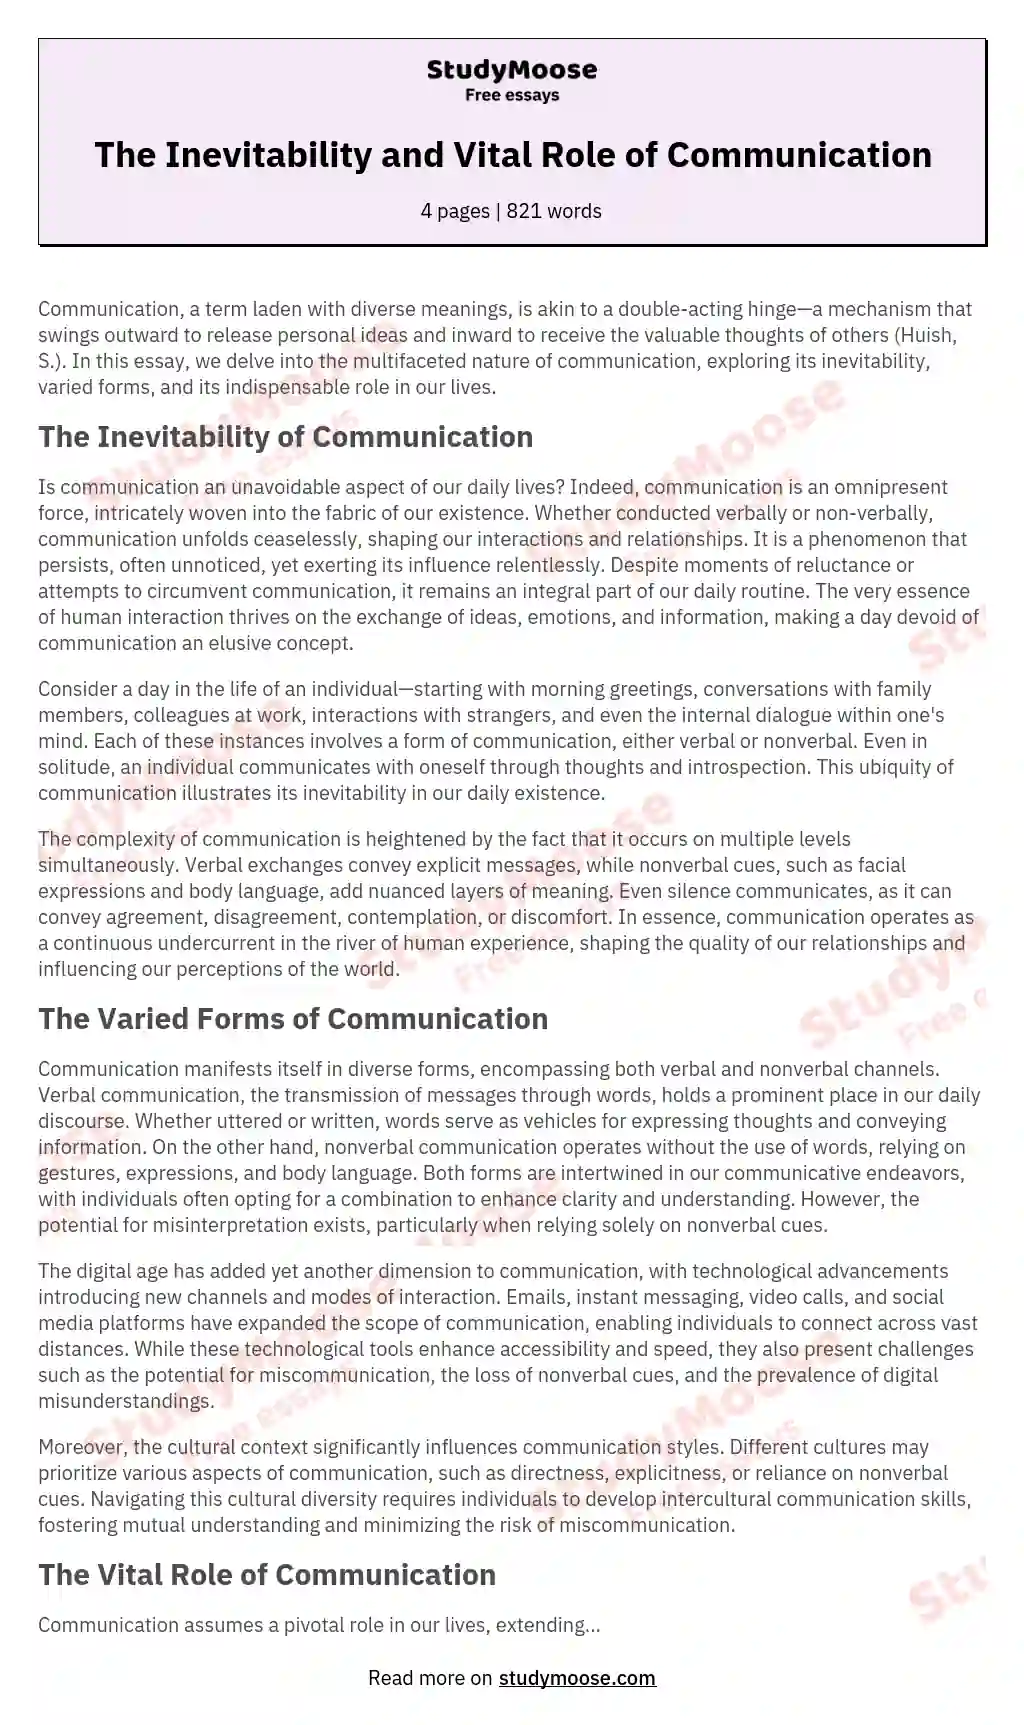 The Inevitability and Vital Role of Communication essay